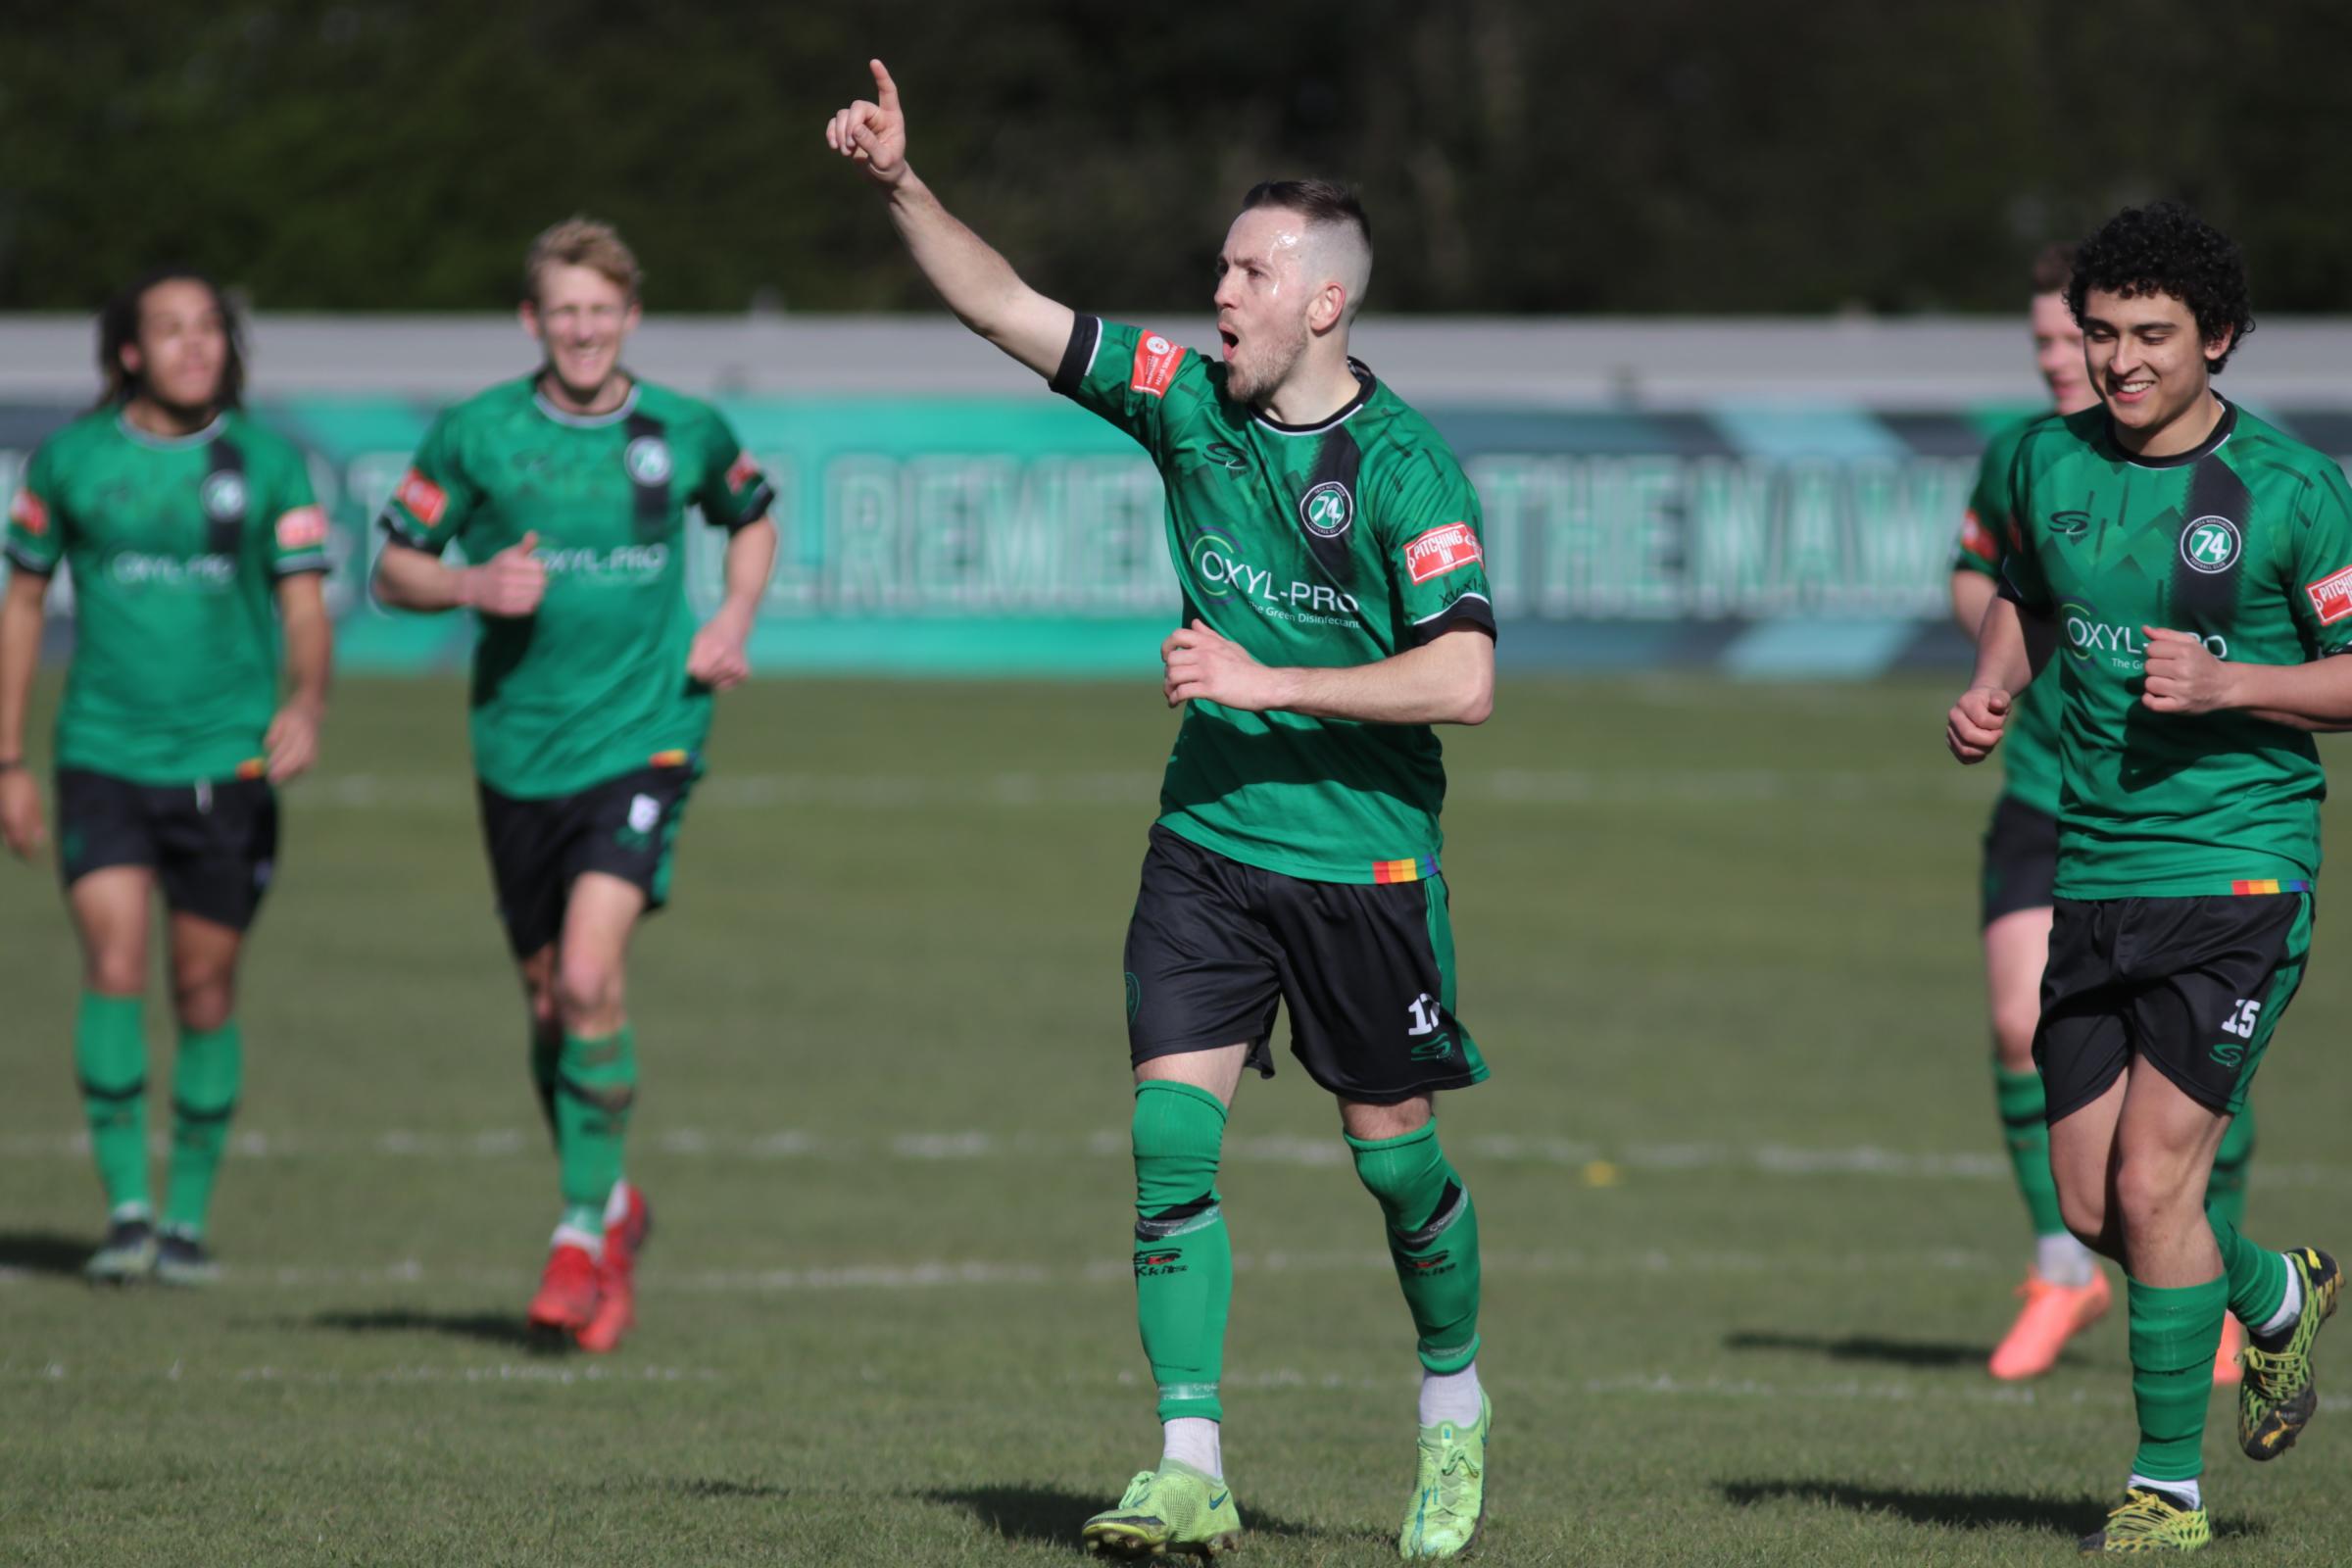 Callum Garner raises his arm after scoring the final goal in 1874 Northwichs 7-0 home win against Market Drayton. Picture: Xenia Simpson Photography